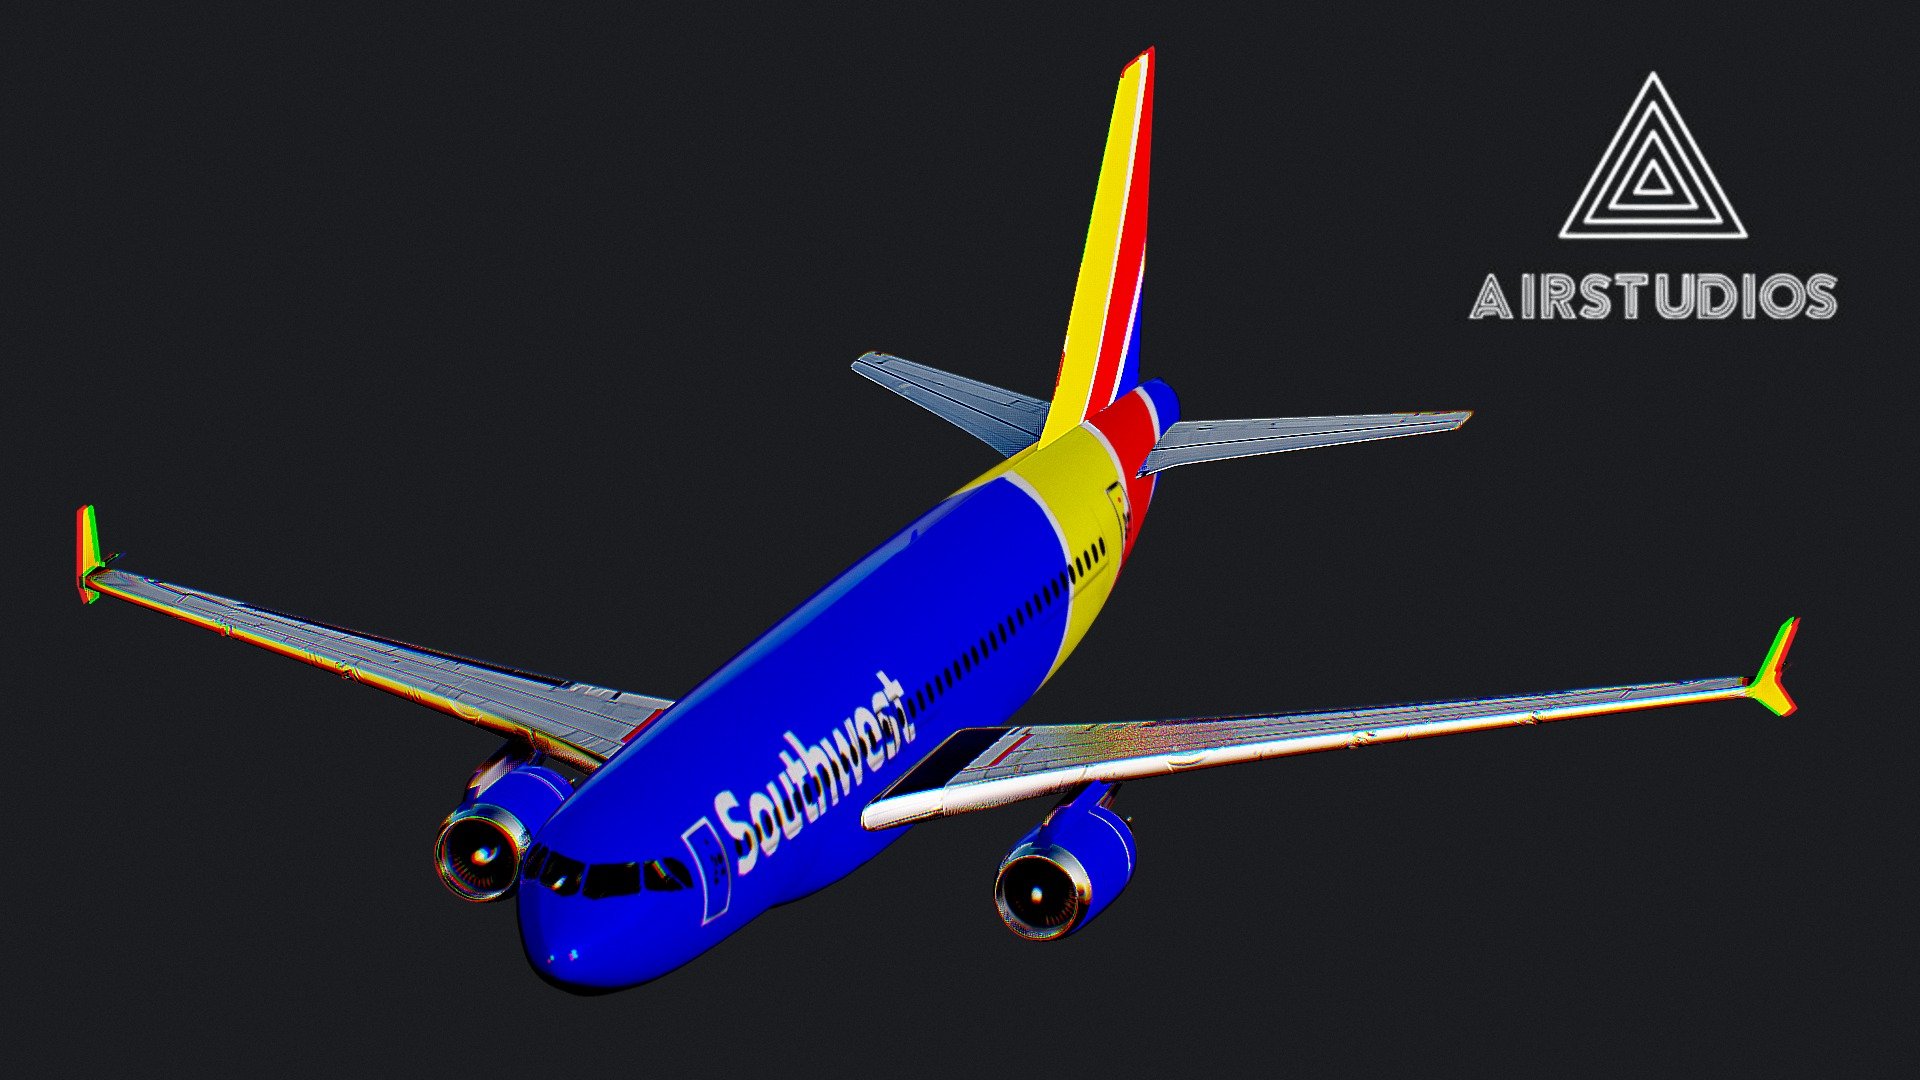 Airbus A320 (Southwest Airlines) Airplane

Made in Blender - Airbus A320 (Southwest Airlines) Airplane - Buy Royalty Free 3D model by AirStudios (@sebbe613) 3d model